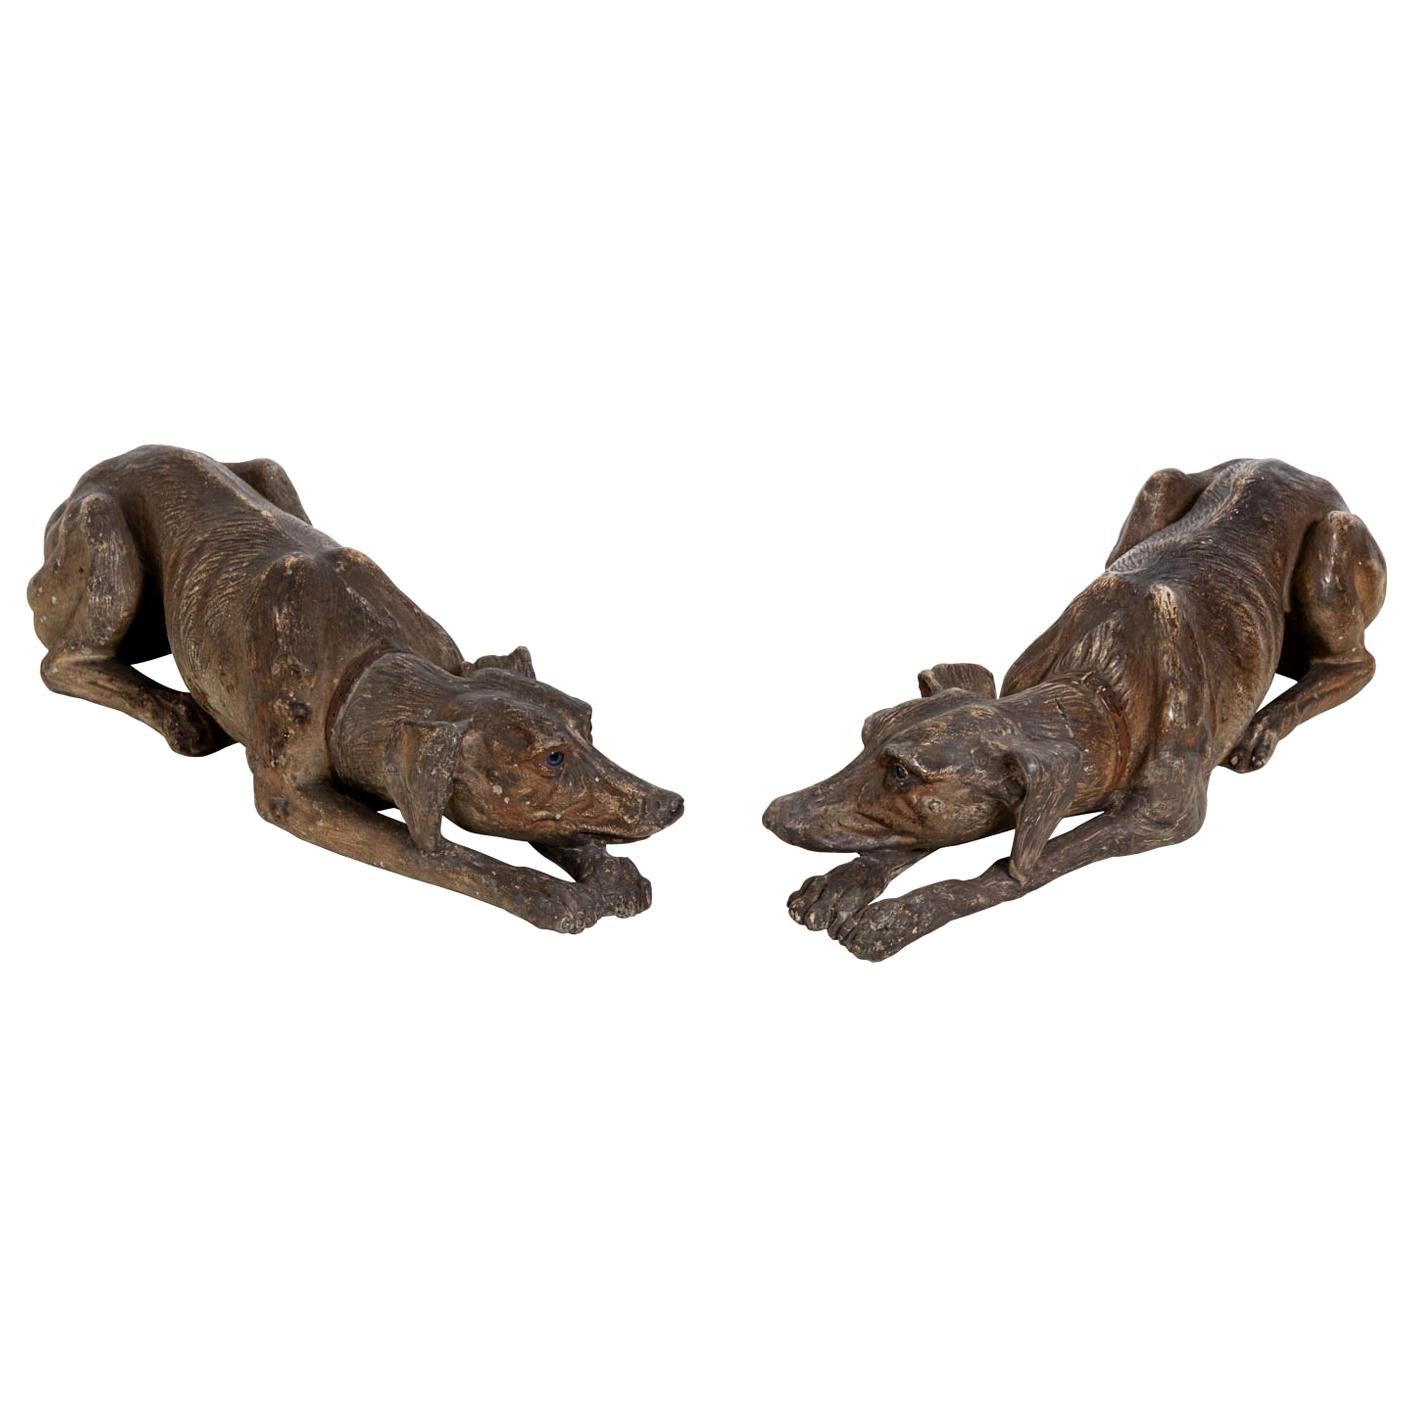 Pair of Terracotta Dog Statues